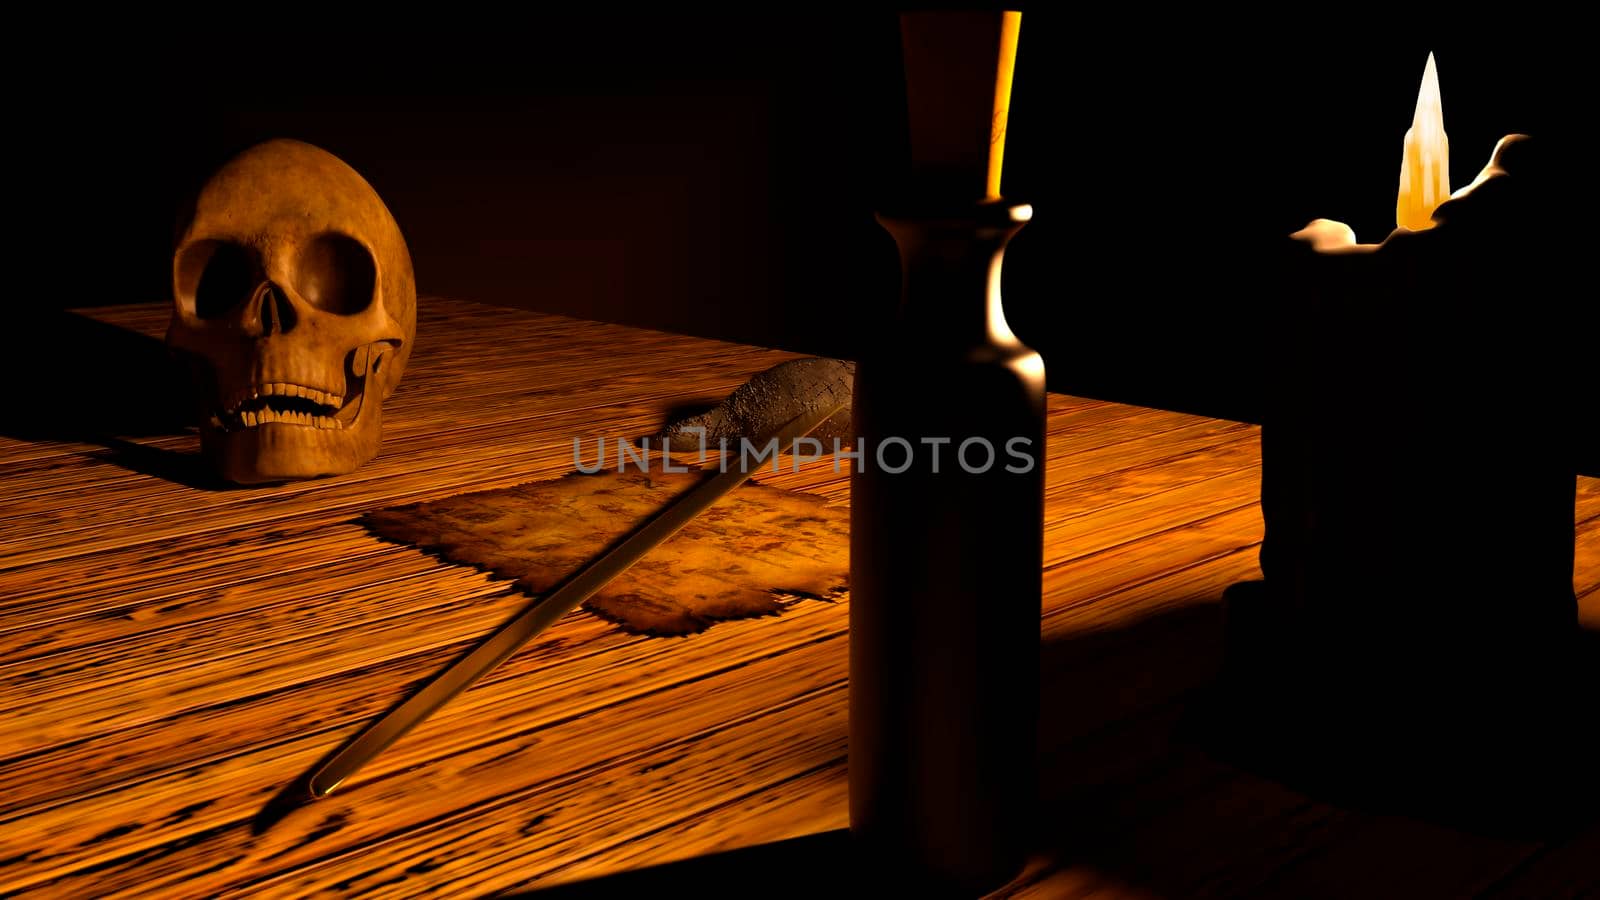 Skull with a burning candle, pirate map, bottle, and sword - 3d rendering